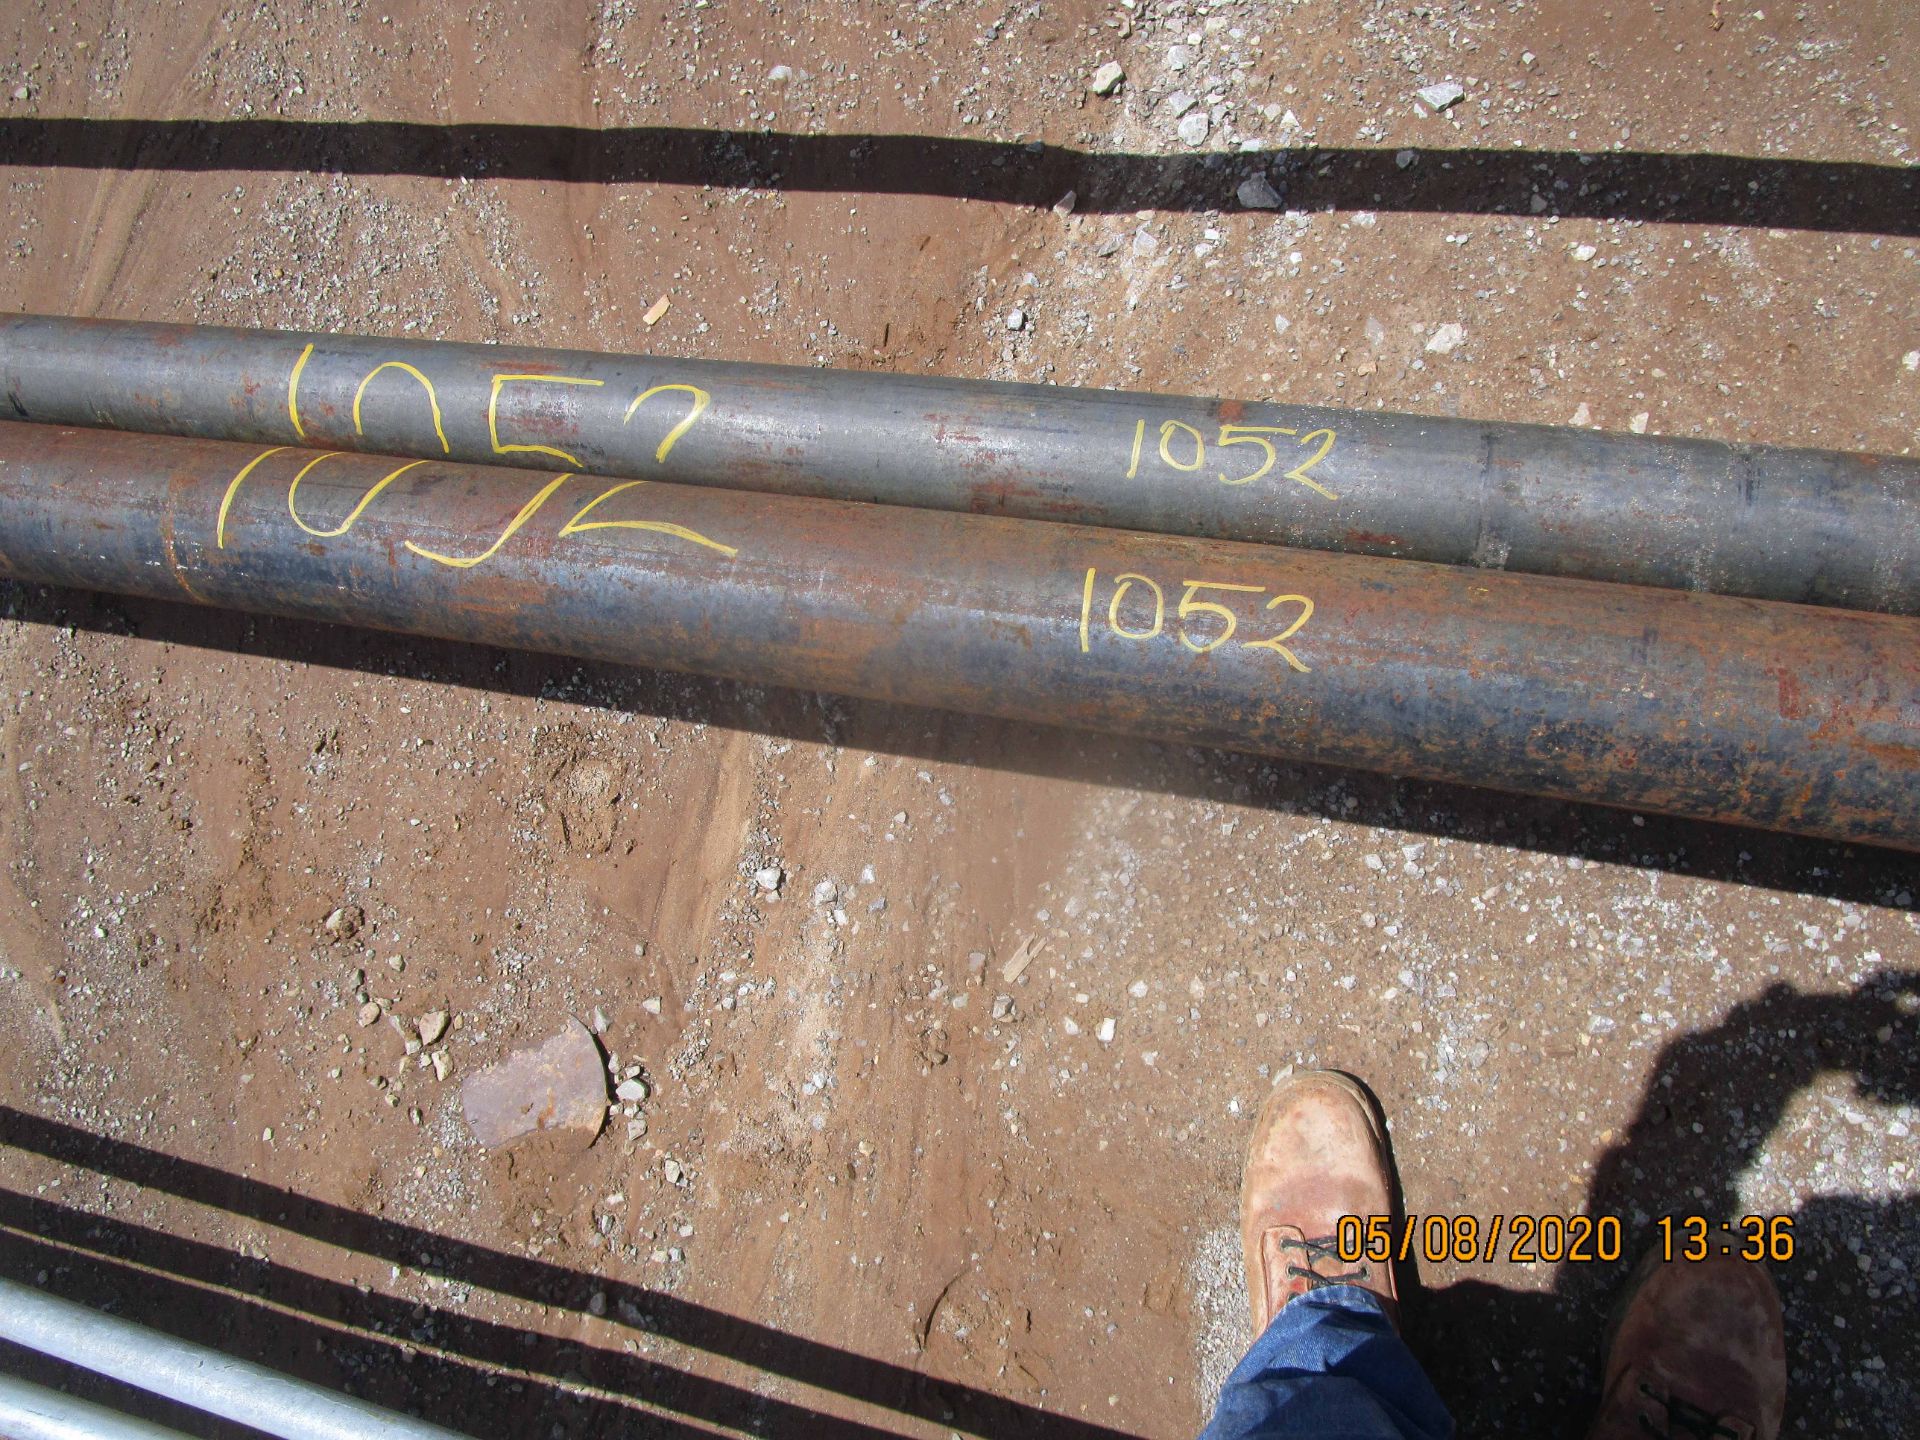 LOT CONSISTING OF: (APPROX. 318.2 INCHES) PIPE,SEAMLESS,4",S160,SA-106-B,ASME B36.10; (APPROX. 93